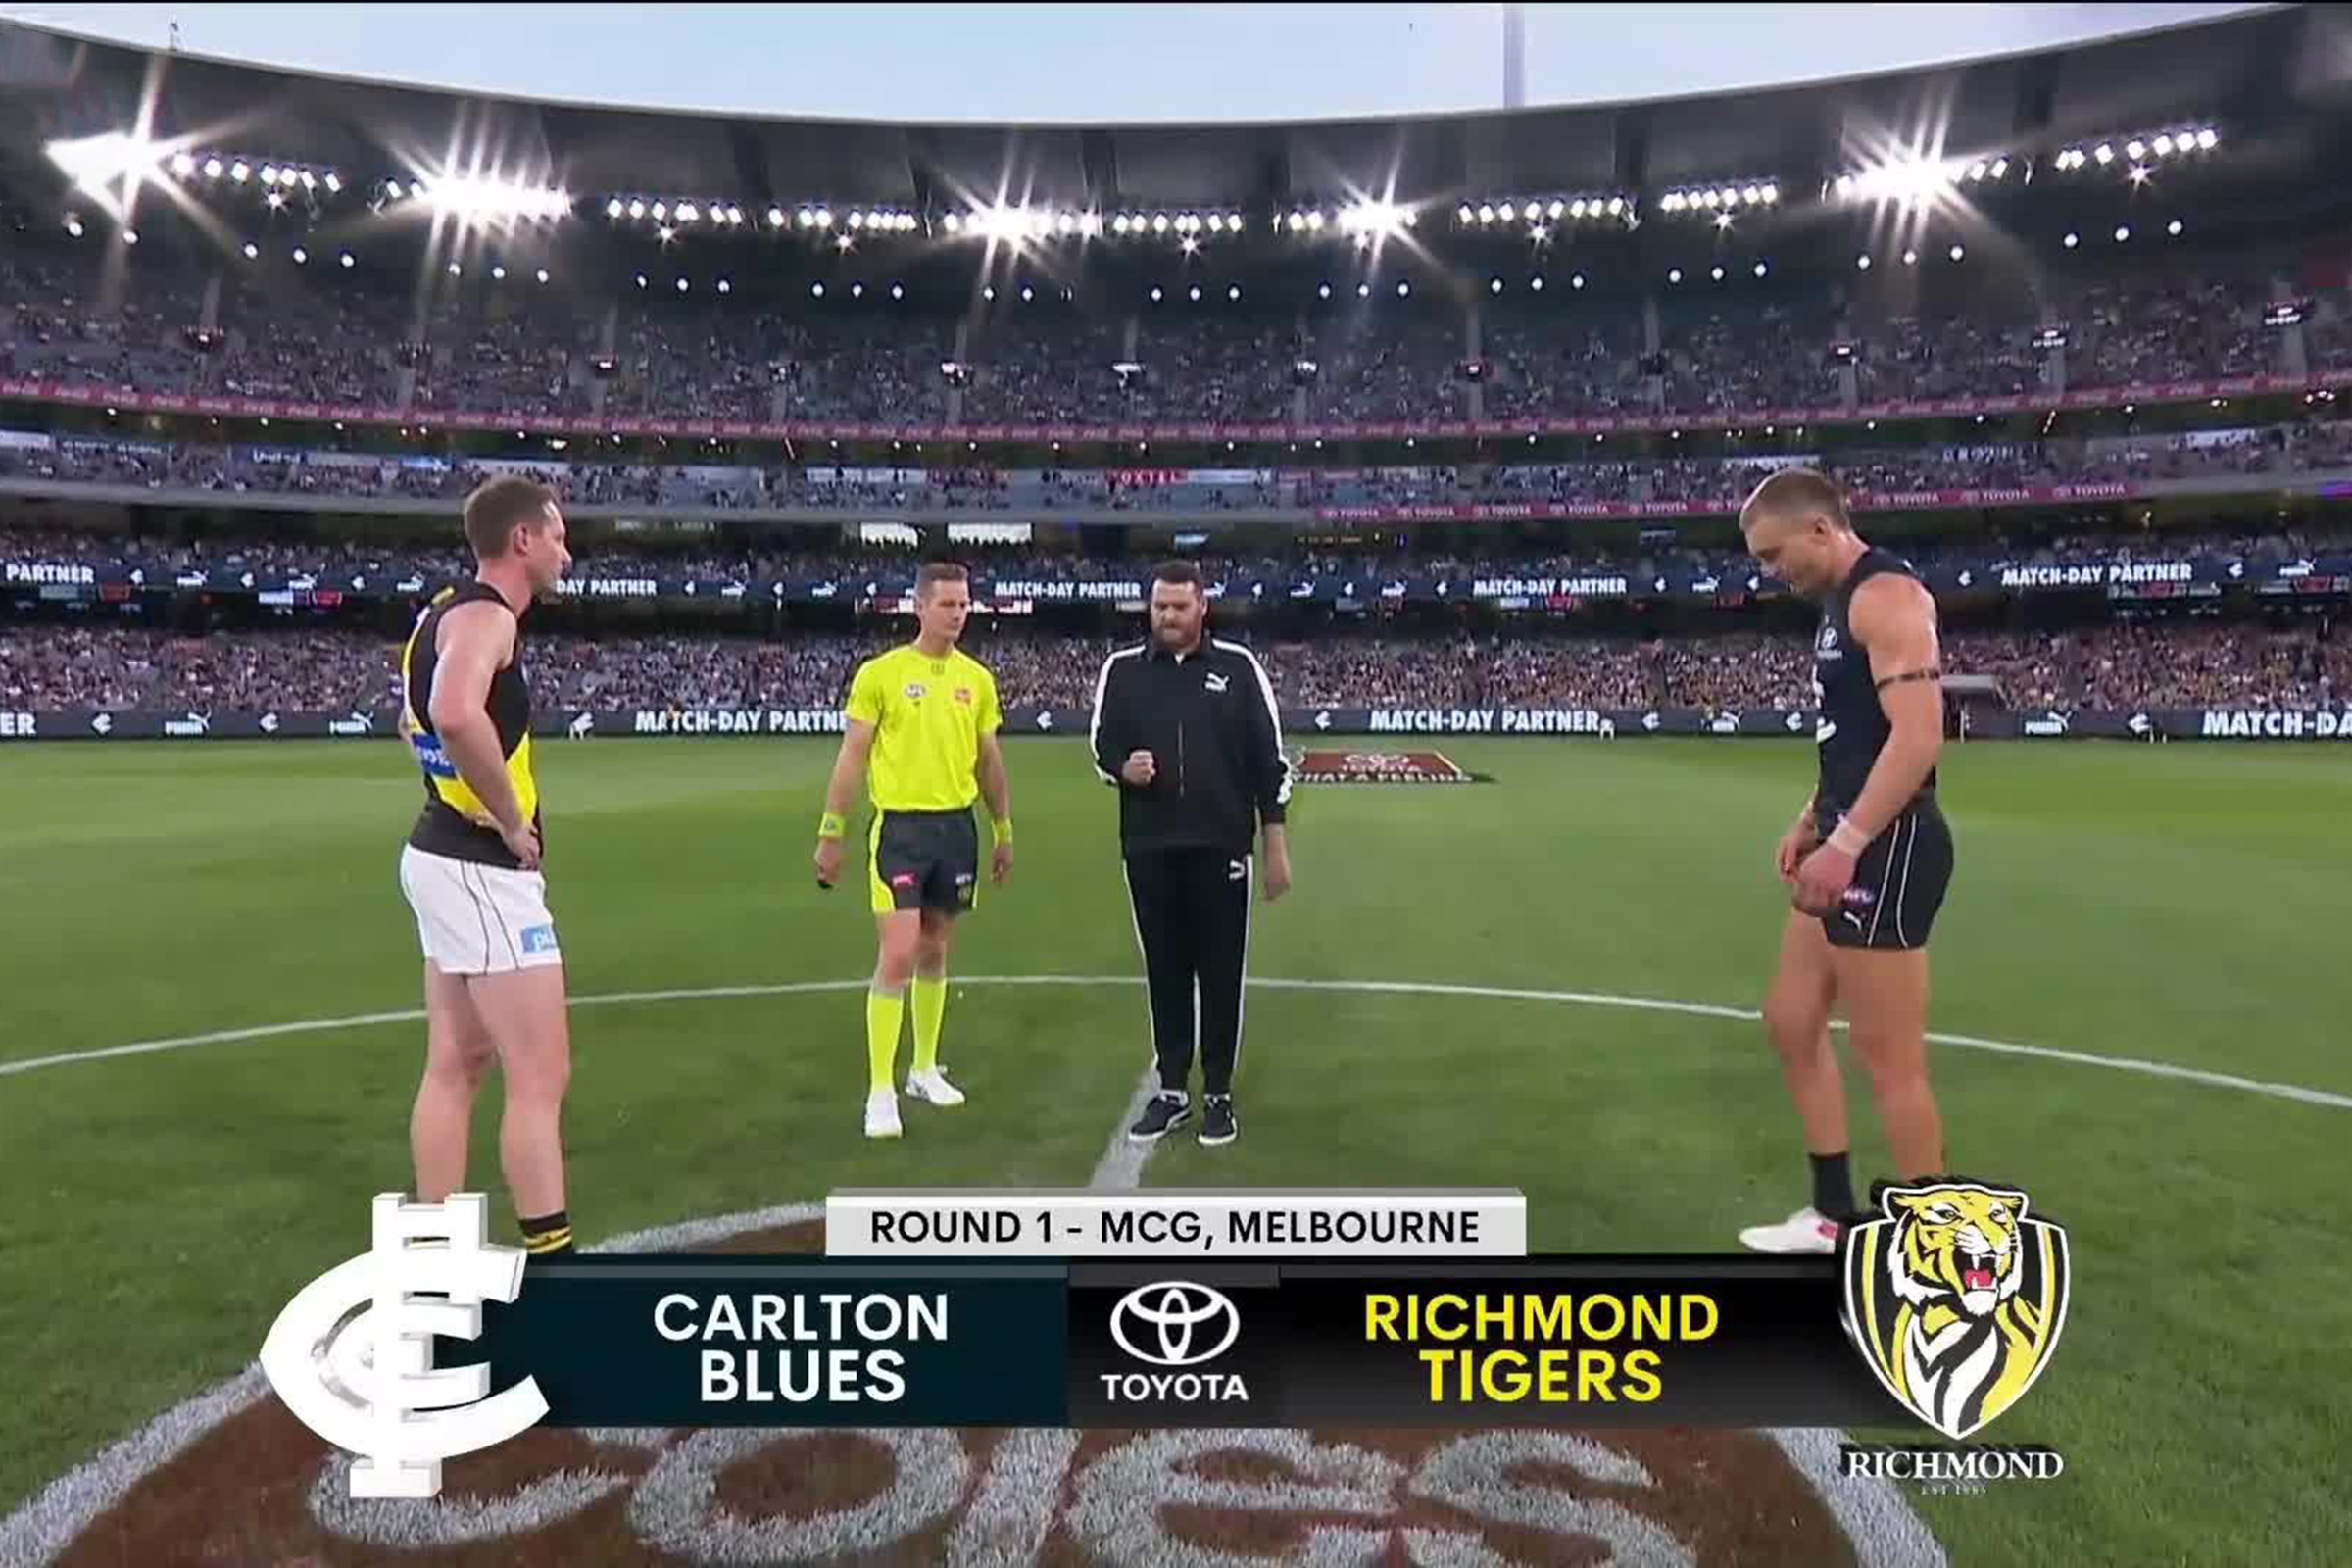 AFL teams Carlton Blues and Richmond tigers captains waiting for the coin flip at round 1 MCG funny coin toss